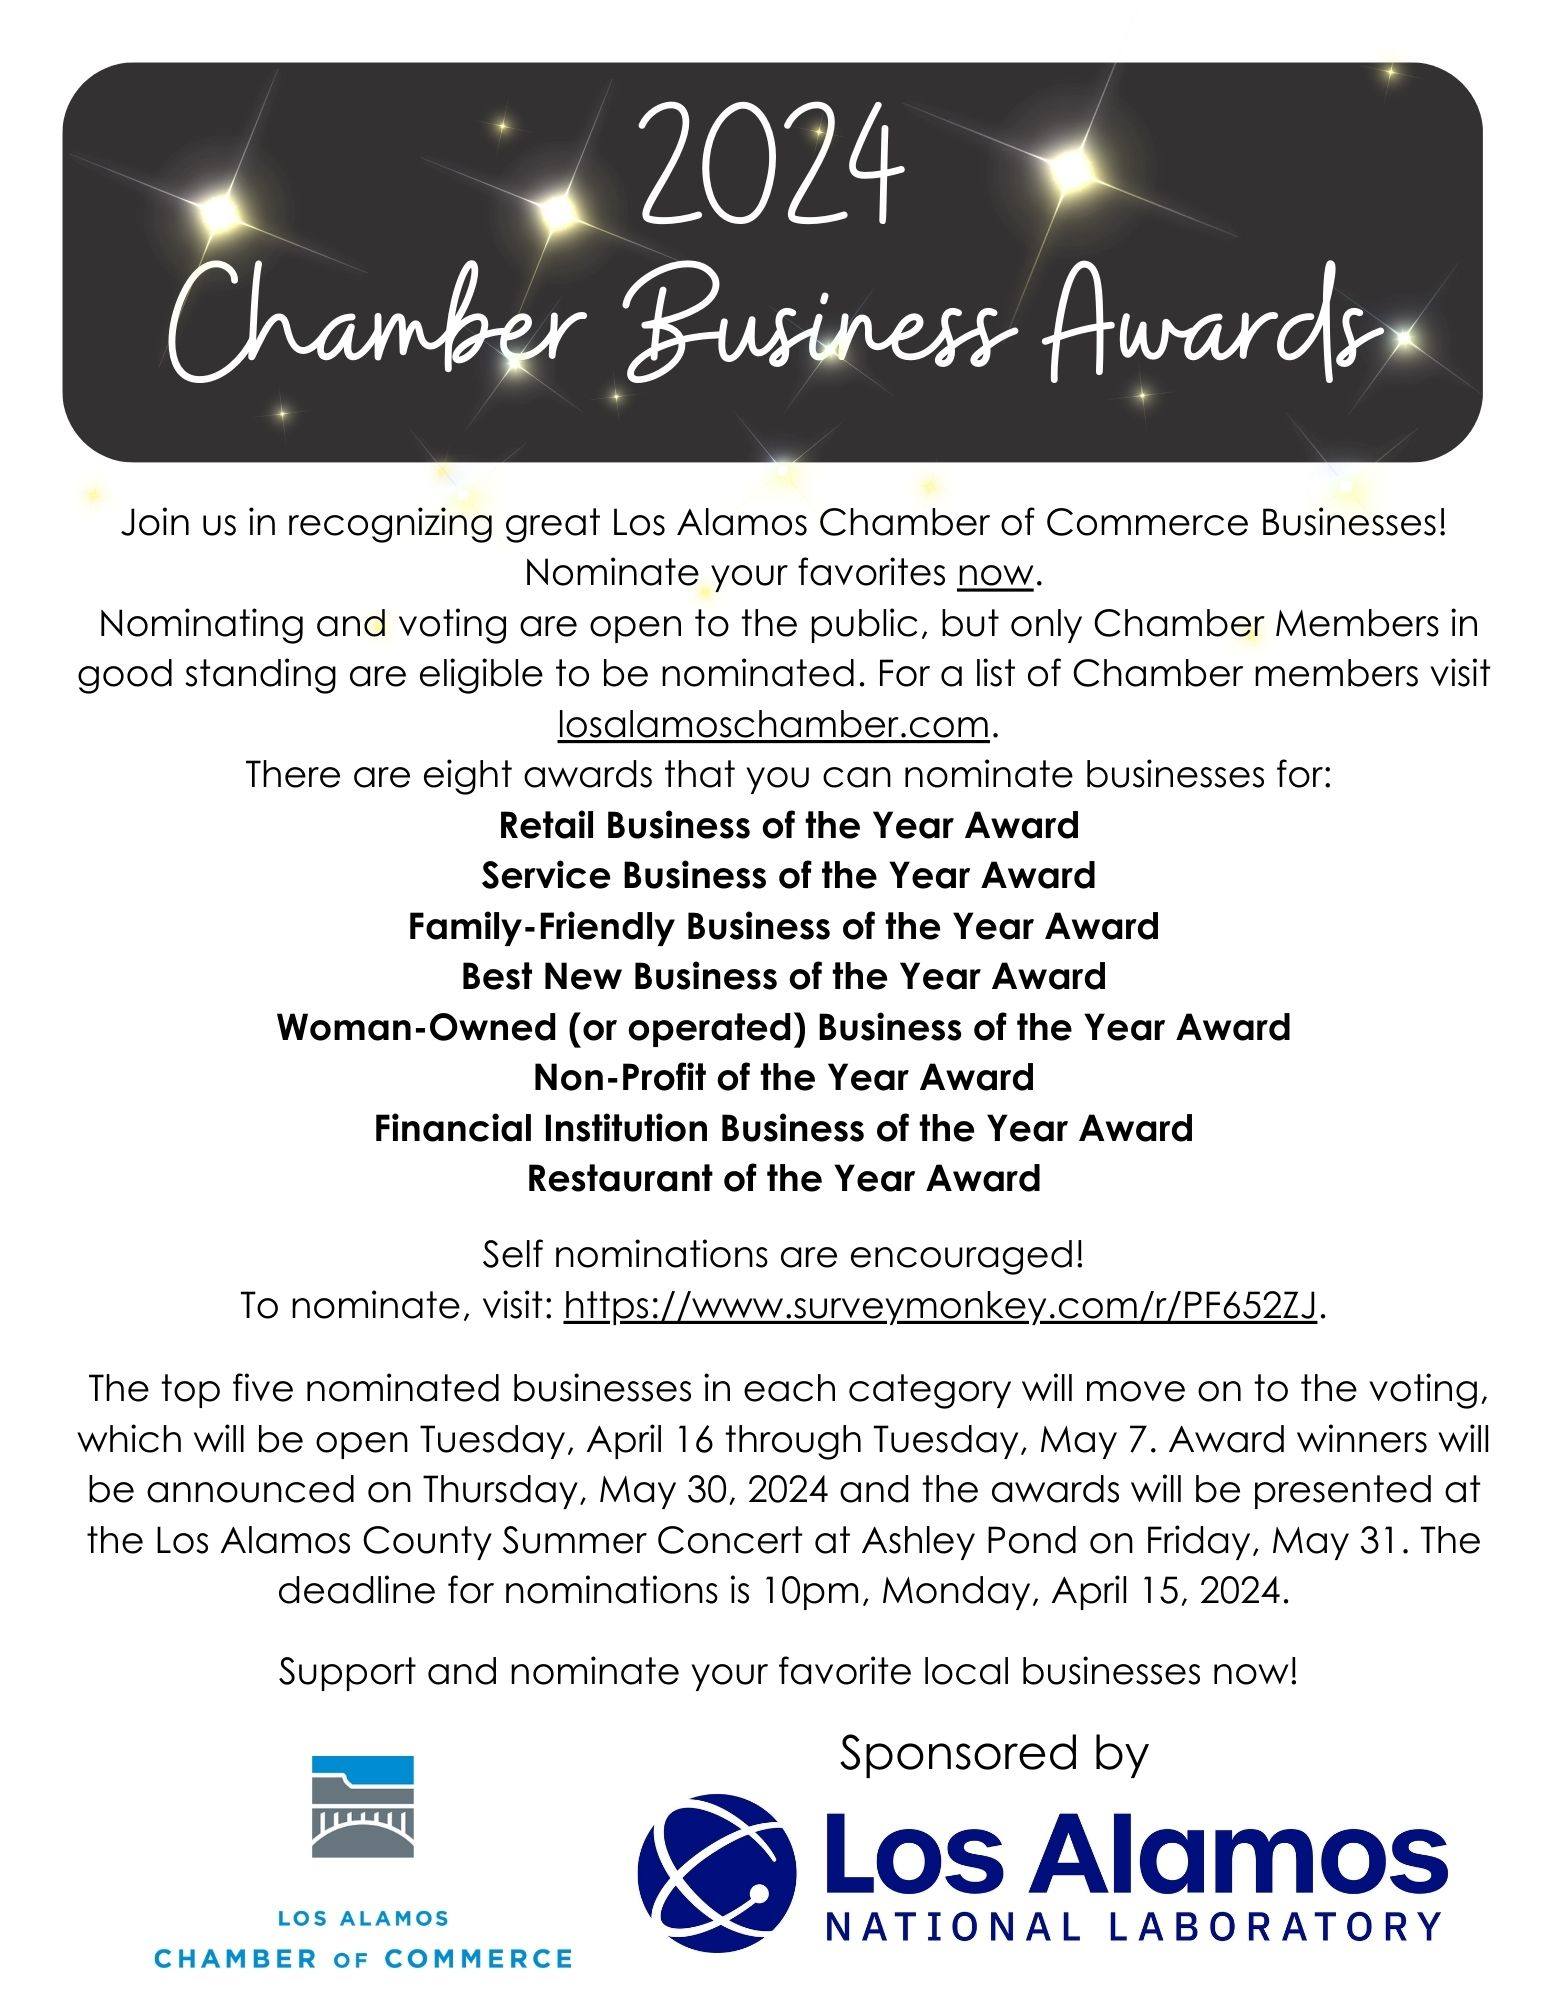 CHAMBER News:</p>
<p>The community is invited to join us in recognizing great Los Alamos Chamber of Commerce Businesses!  Nominate your favorites now.</p>
<p>Nominating and voting are open to the public, but only Chamber members are eligible to be nominated.</p>
<p>For a list of Chamber members, visit: LosAlamosChamber.com/list/</p>
<p>There are eight award categories for which businesses may be nominated:</p>
<p>Retail Business of the Year Award<br />
Service Business of the Year Award<br />
Family-Friendly Business of the Year Award<br />
Best New Business of the Year Award<br />
Woman Owned Business of the Year Award<br />
Non-Profit of the Year Award<br />
Financial Institution Business of the Year Award<br />
Restaurant of the Year Award<br />
Self-nominations are encouraged! To nominate, visit: https://www.surveymonkey.com/r/PF652ZJ</p>
<p>The top five nominated businesses in each category will move on to the voting, which will be open Tuesday, April 16 through Tuesday, May 7. Award winners will be announced on Thursday, May 30, 2024 in the Los Alamos Daily Post and the awards will be presented at the Los Alamos County Summer Concert at Ashley Pond on Friday, May 31.</p>
<p> The deadline for nominations is 10 p.m. Monday, April 15, 2024.</p>
<p>To become a member or for more information, visit LosAlamosChamber.com or contact Ryn Herrmann 505.661.4807 ryn@losalamos.org or Sam McRae 505.661.4816 sam@losalamos.org.</p>
<p>2024 Chamber Awards Announcement